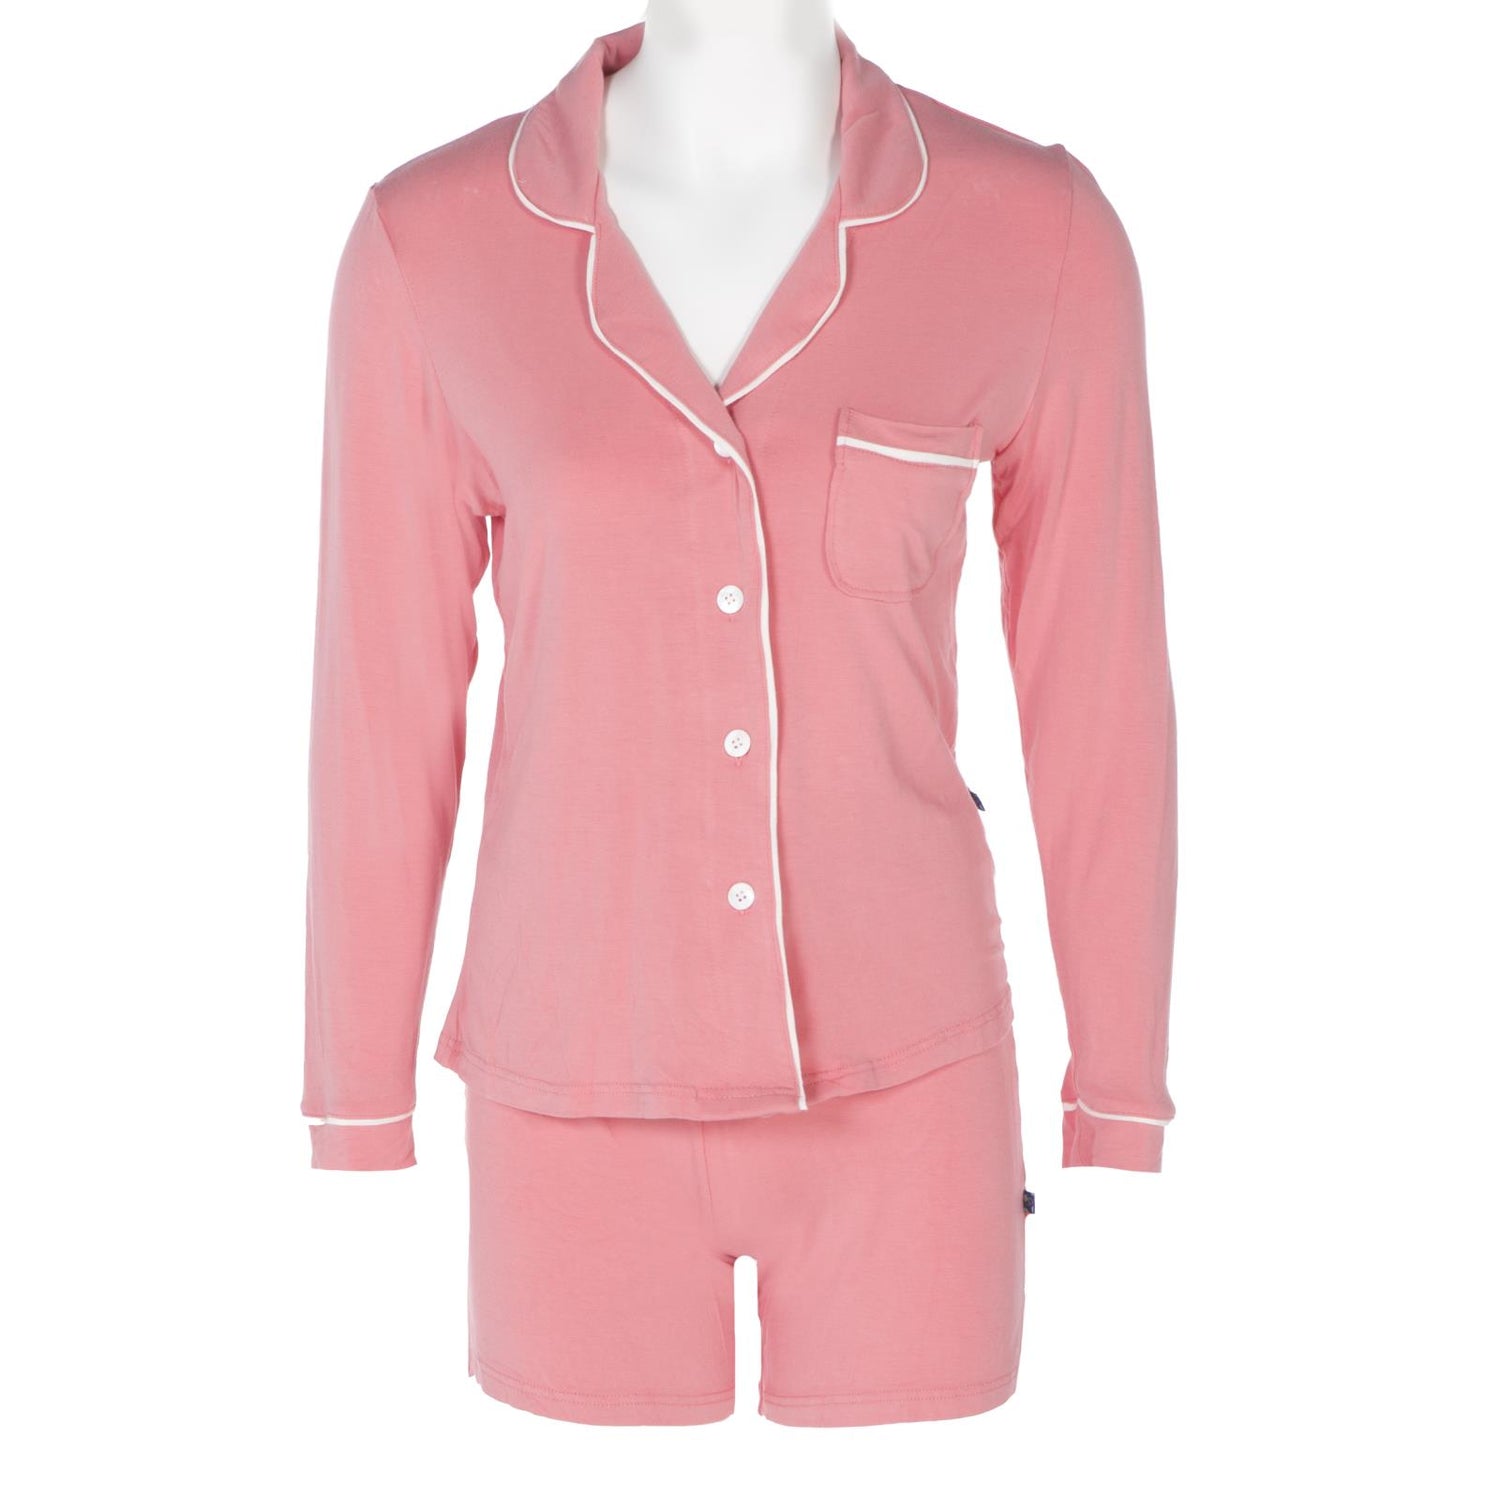 Women's Collared Pajama Set with Shorts in Strawberry with Natural Trim